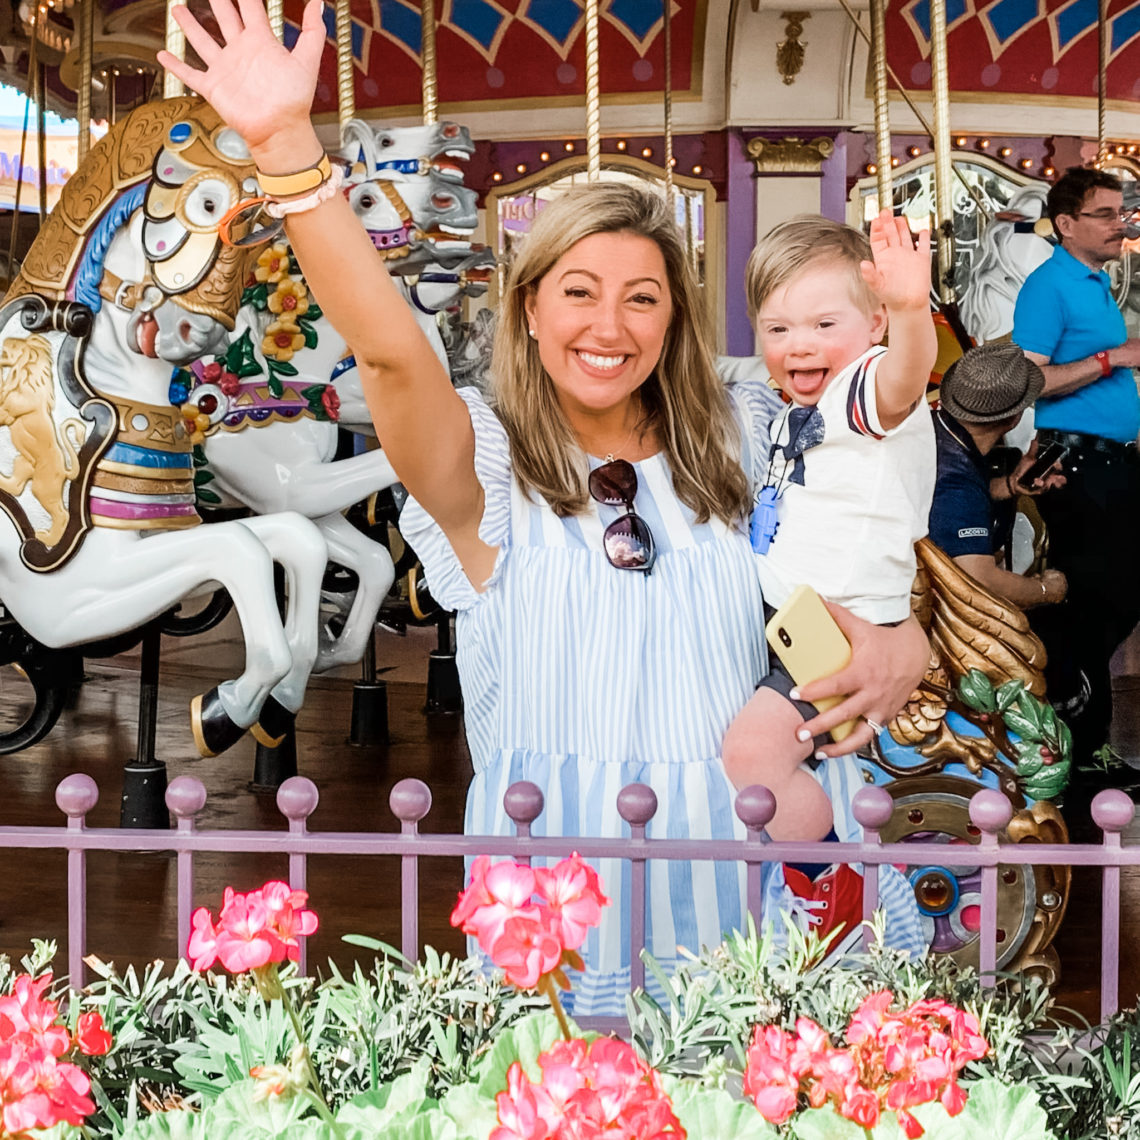 mom and toddler excited in front of the carousel at Disney World